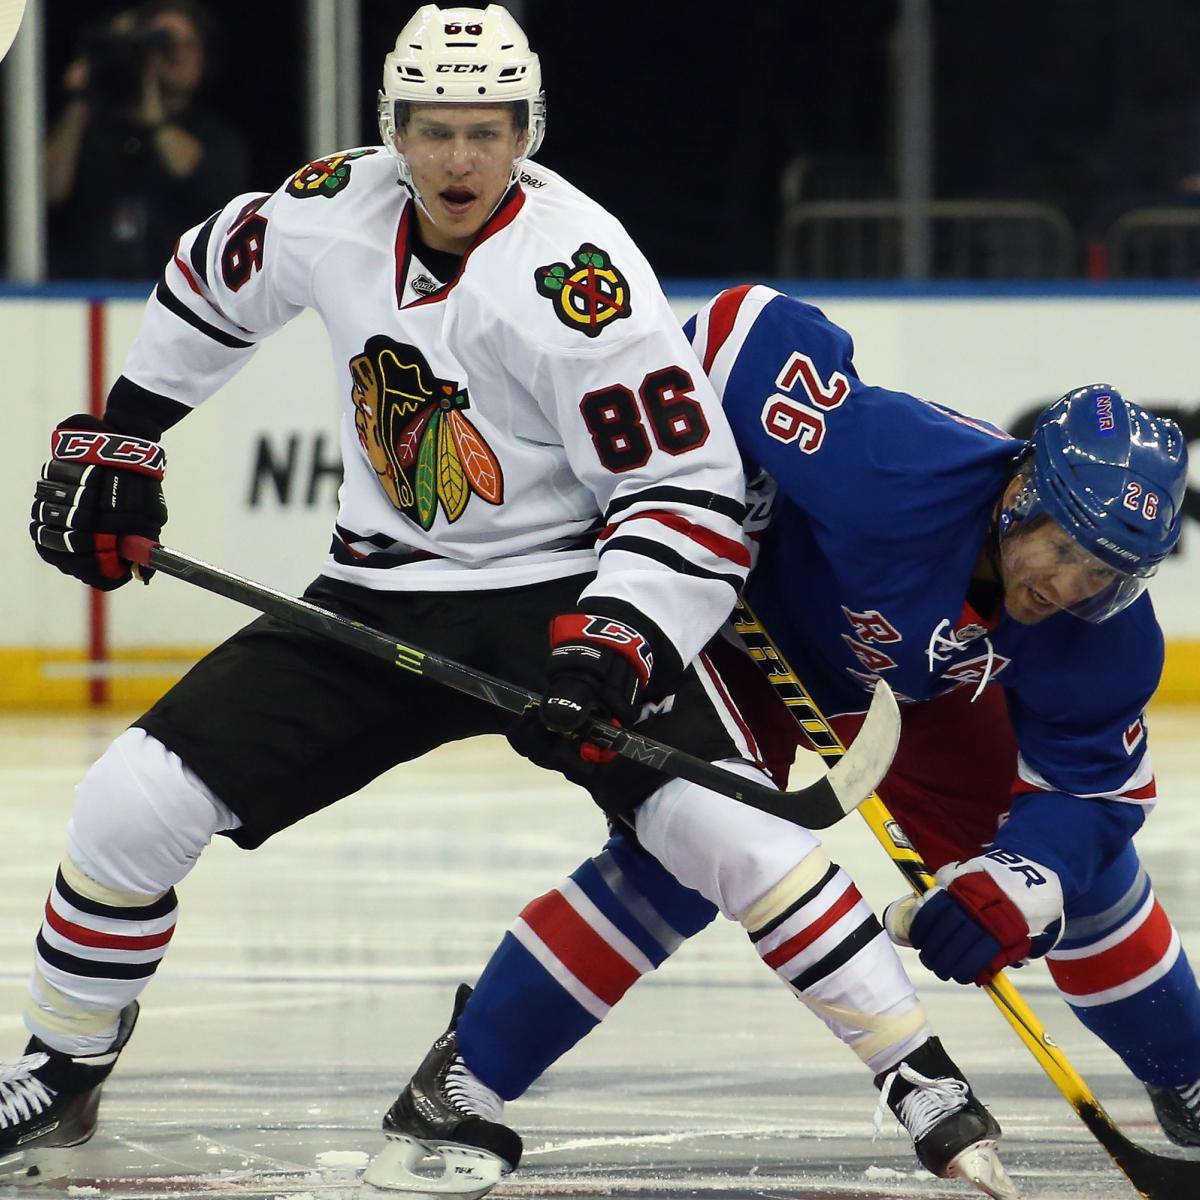 Latest Updates on the Top Prospects for the Chicago Blackhawks News